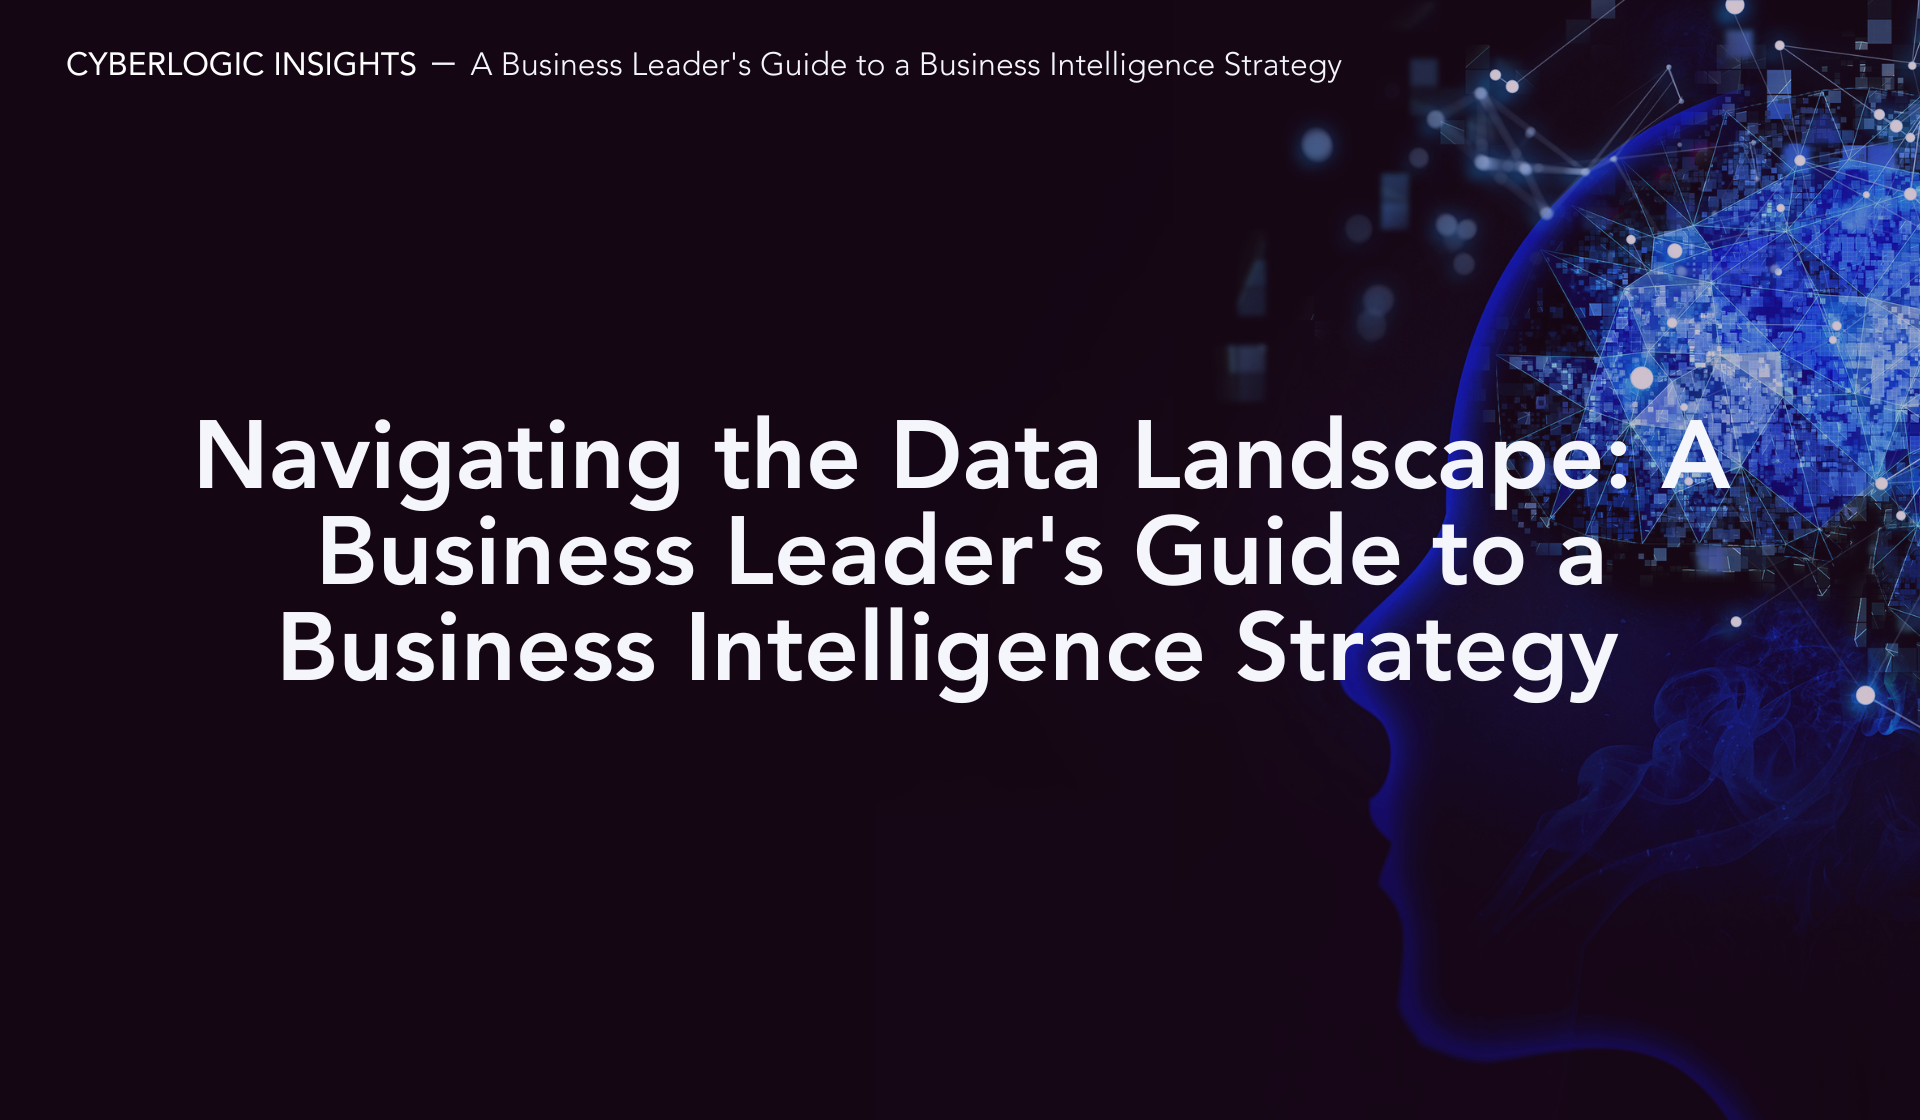 A Business Leader's Guide to Business Intelligence Strategy